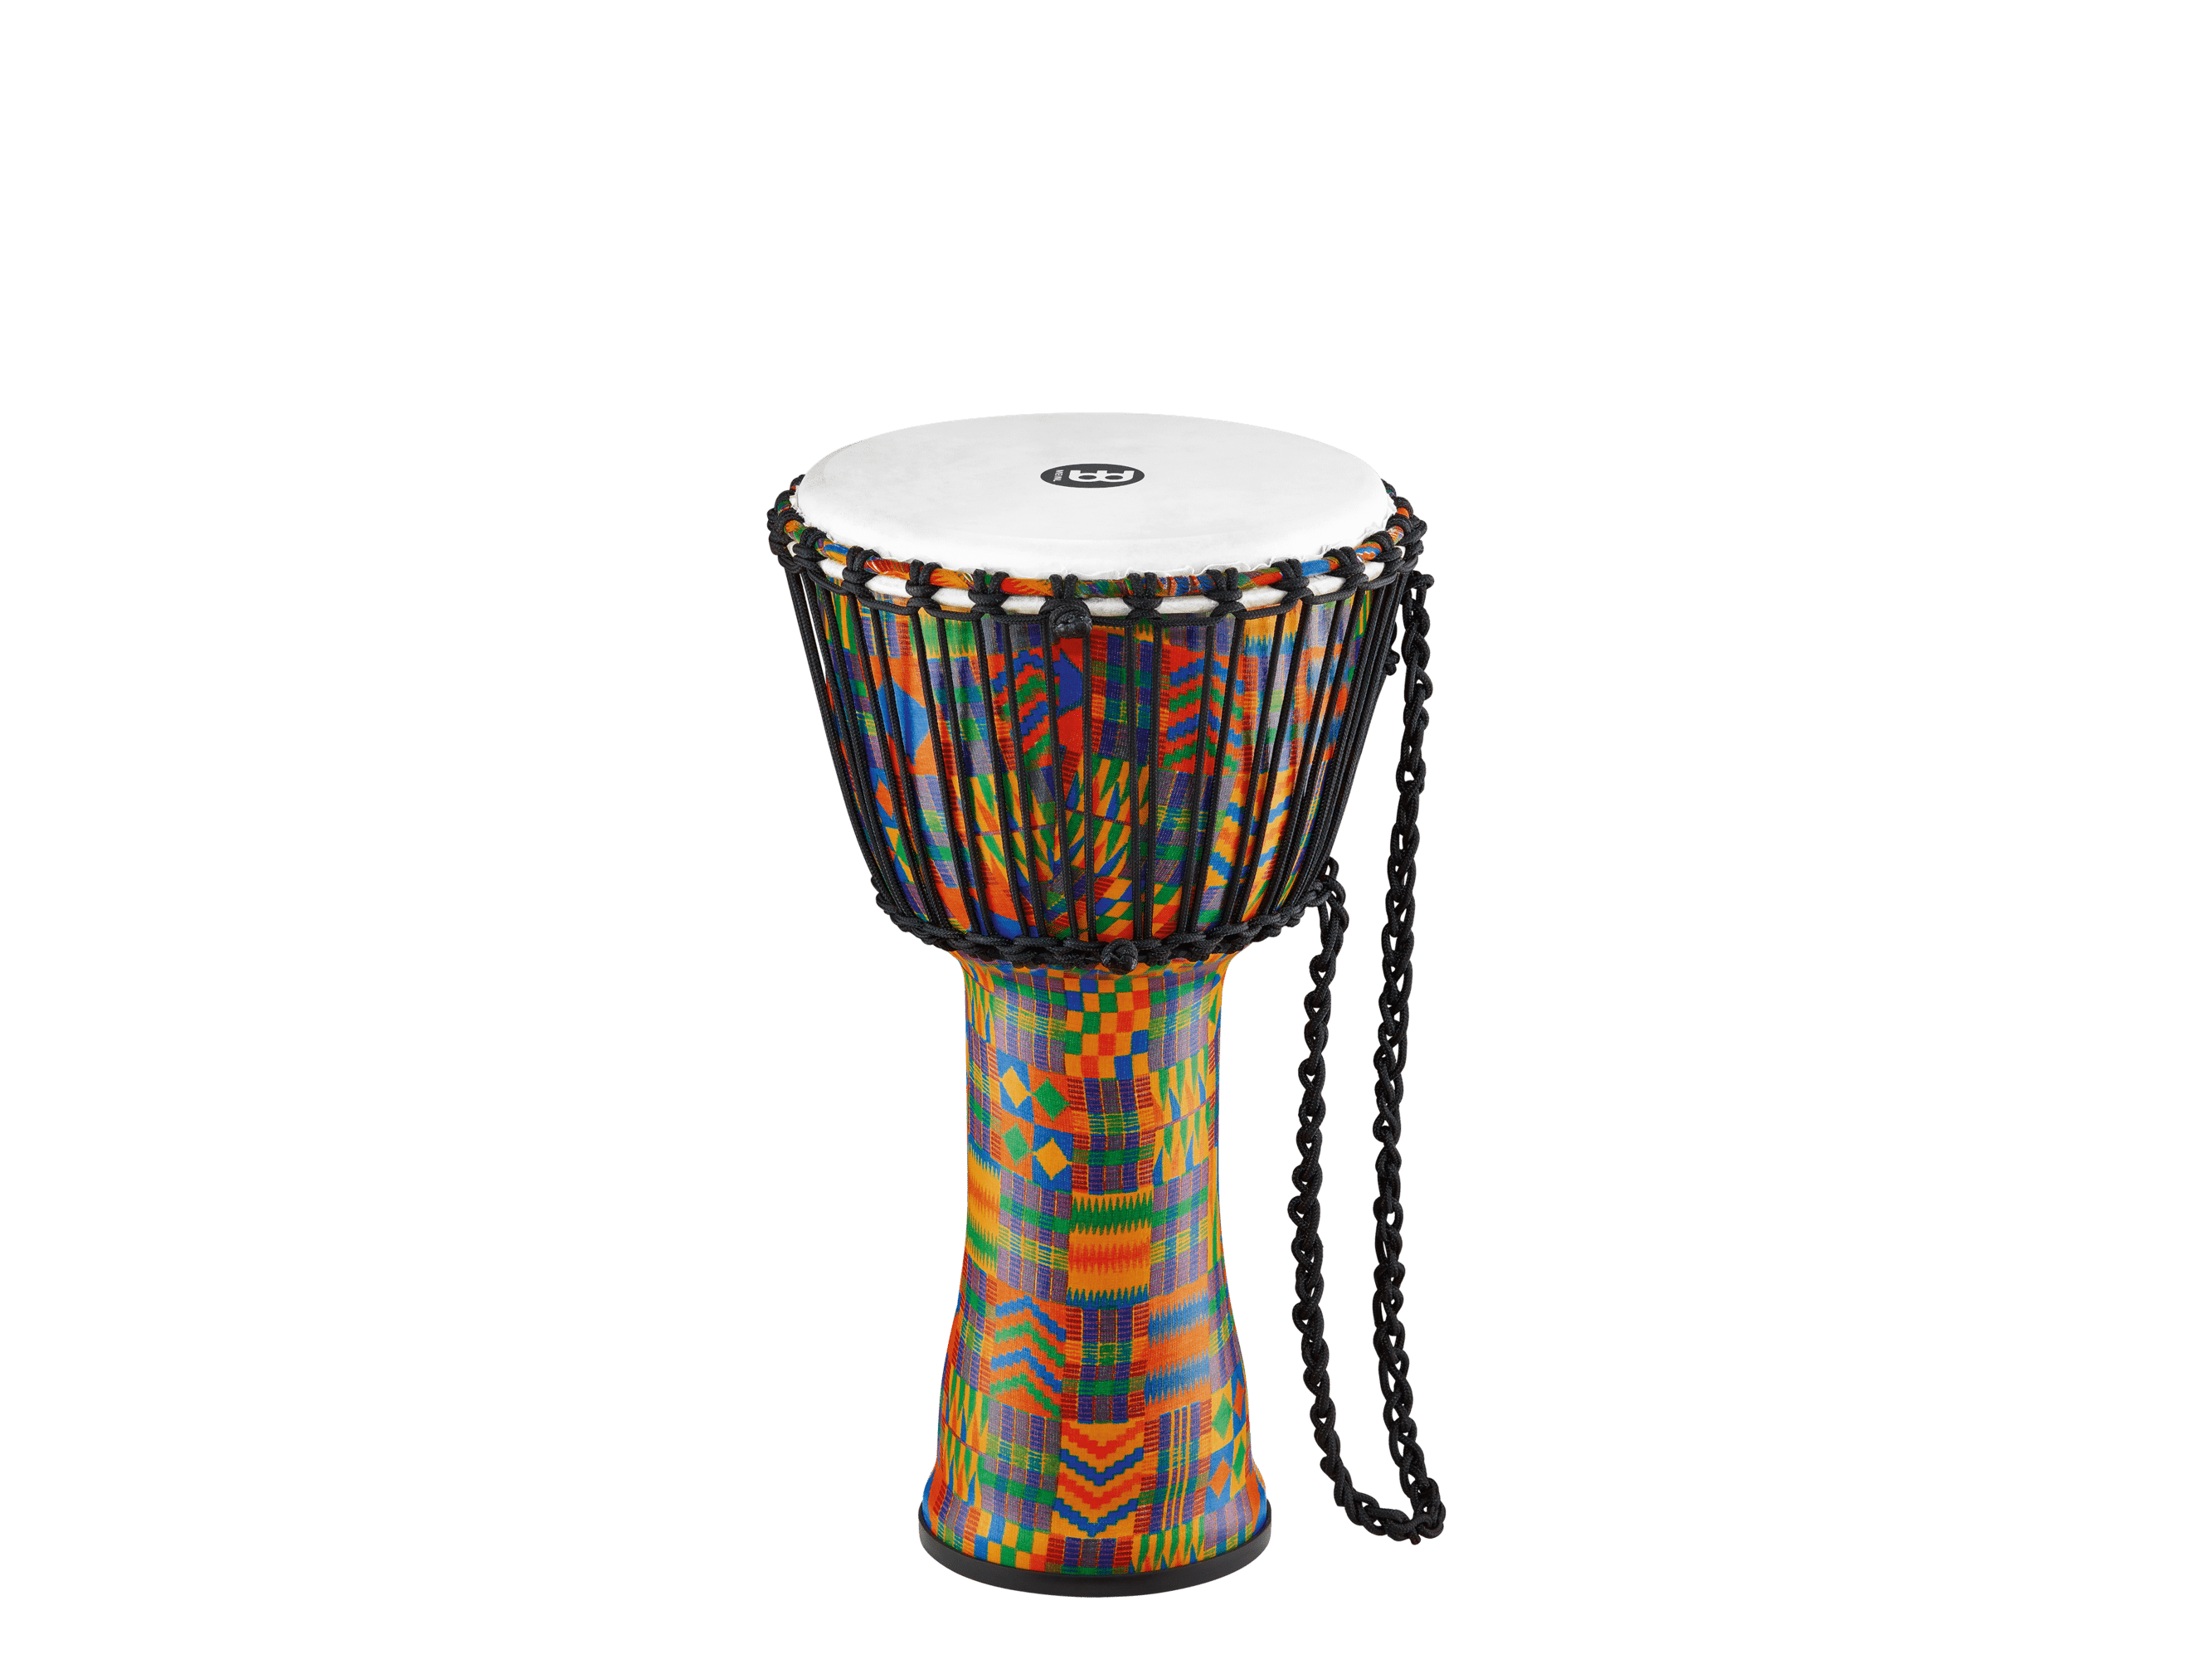 8 Small Size Meinl Percussion Travel Djembe with Synthetic Shell and Head 2-YEAR WARRANTY 8 Mechanically Tuned PMDJ2-S-F NOT MADE IN CHINA Kenyan Quilt S 